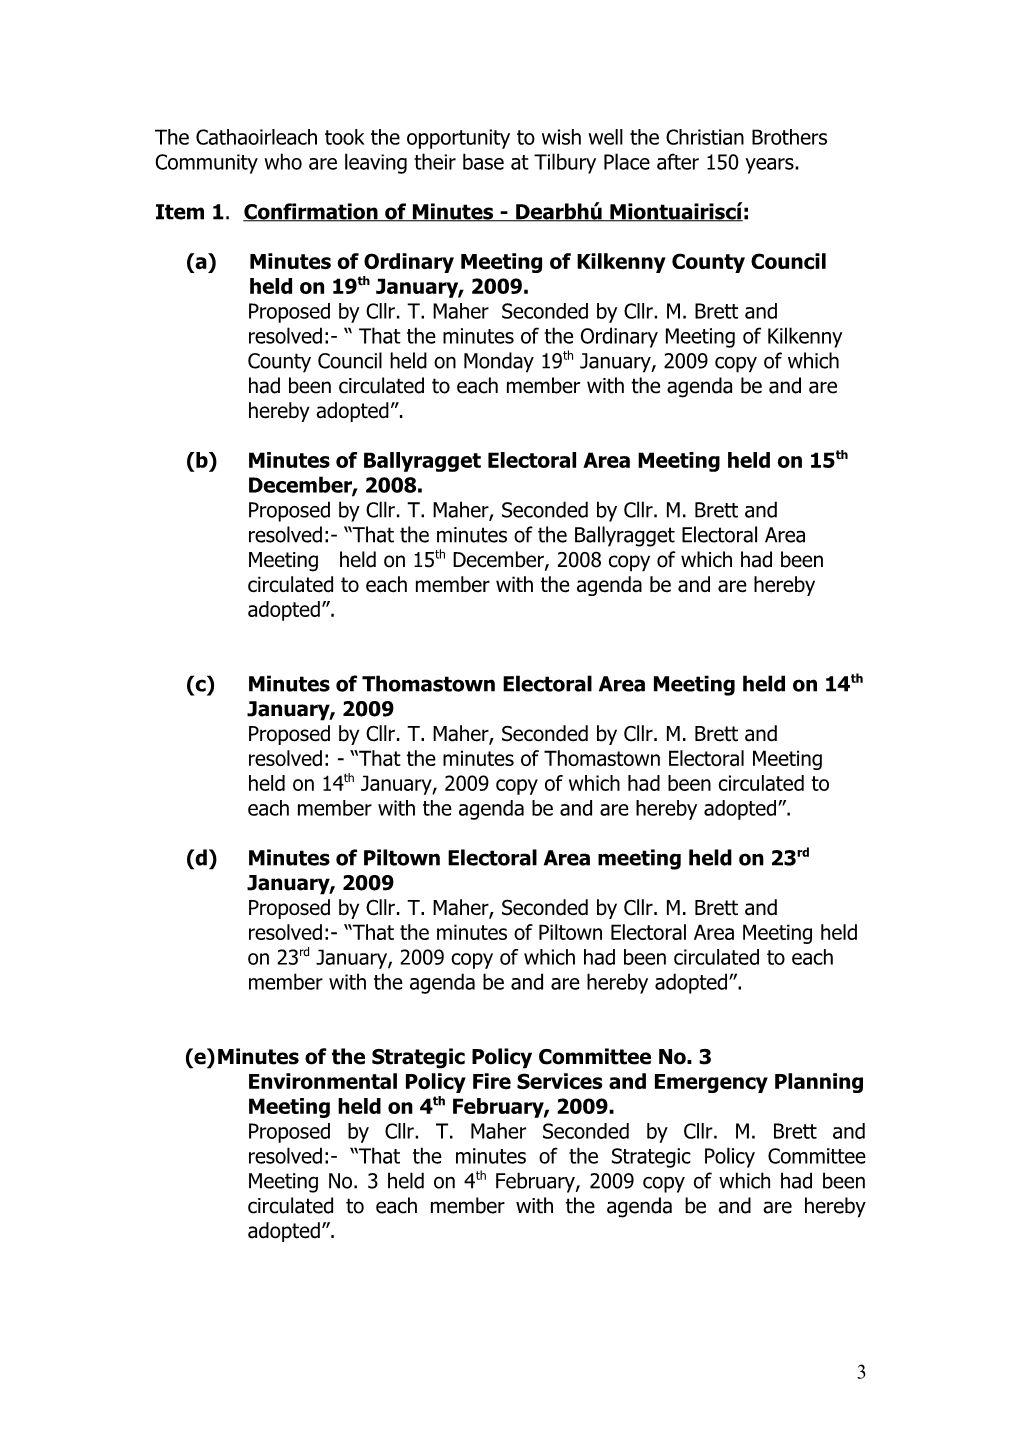 Minutes of Ordinary Meeting of Kilkenny County Council Held on Monday 19Th of January, 2009 at 3